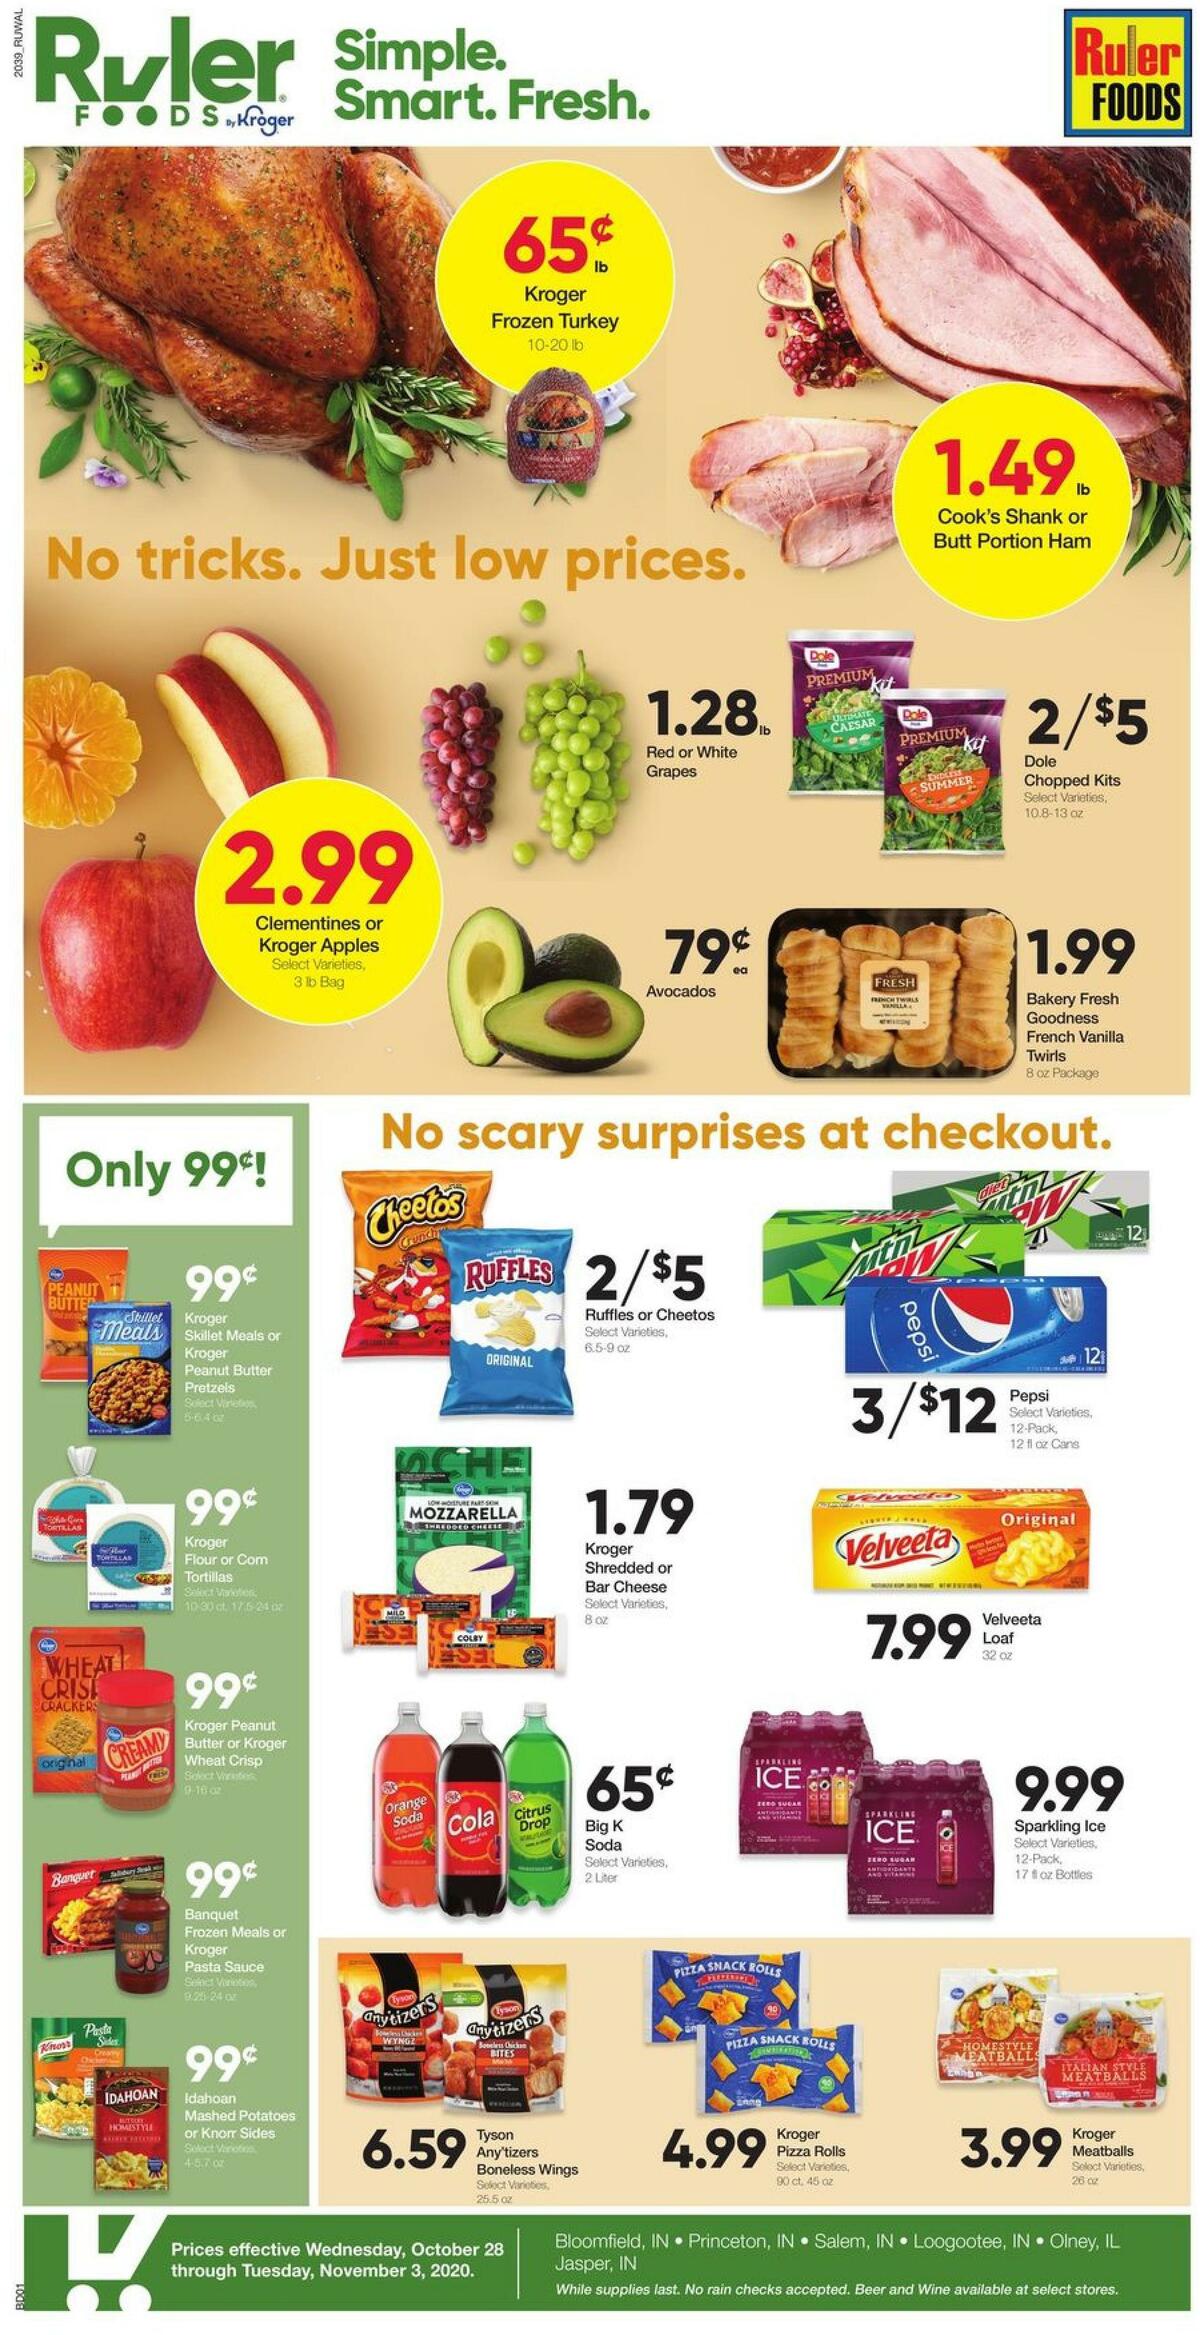 Ruler Foods Best Offers And Special Buys From October 28